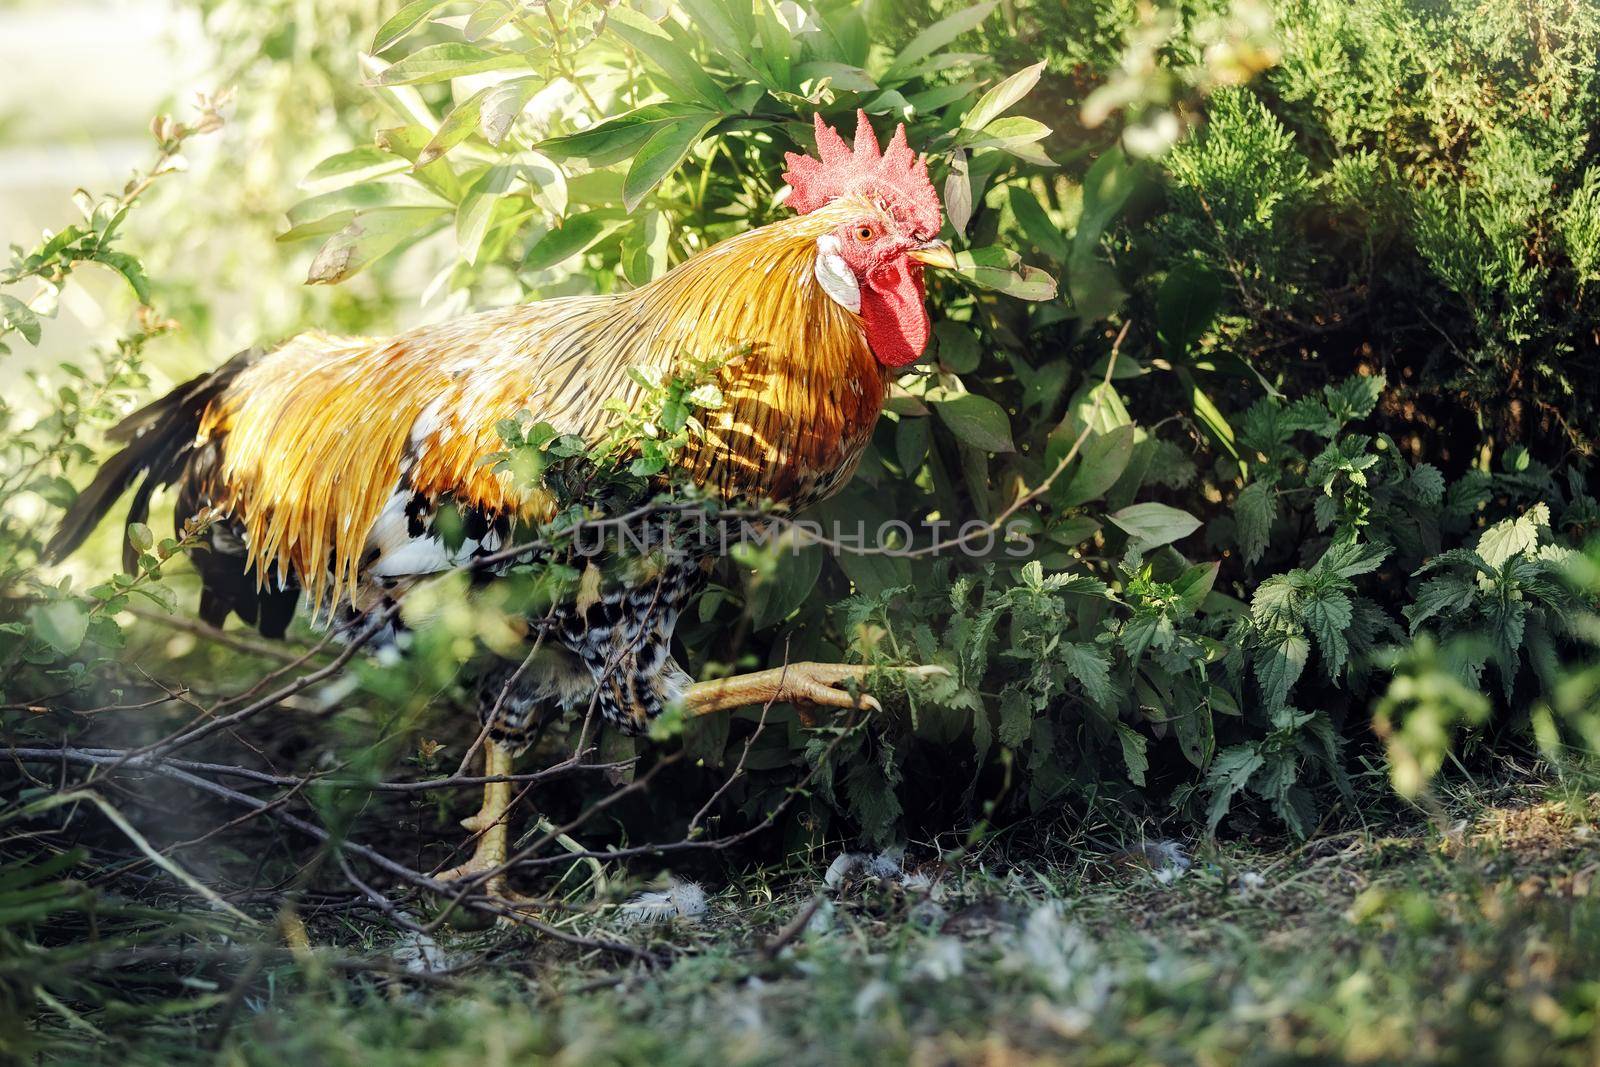 An energetic strong and healthy rooster thrust one's way among the green bushes.